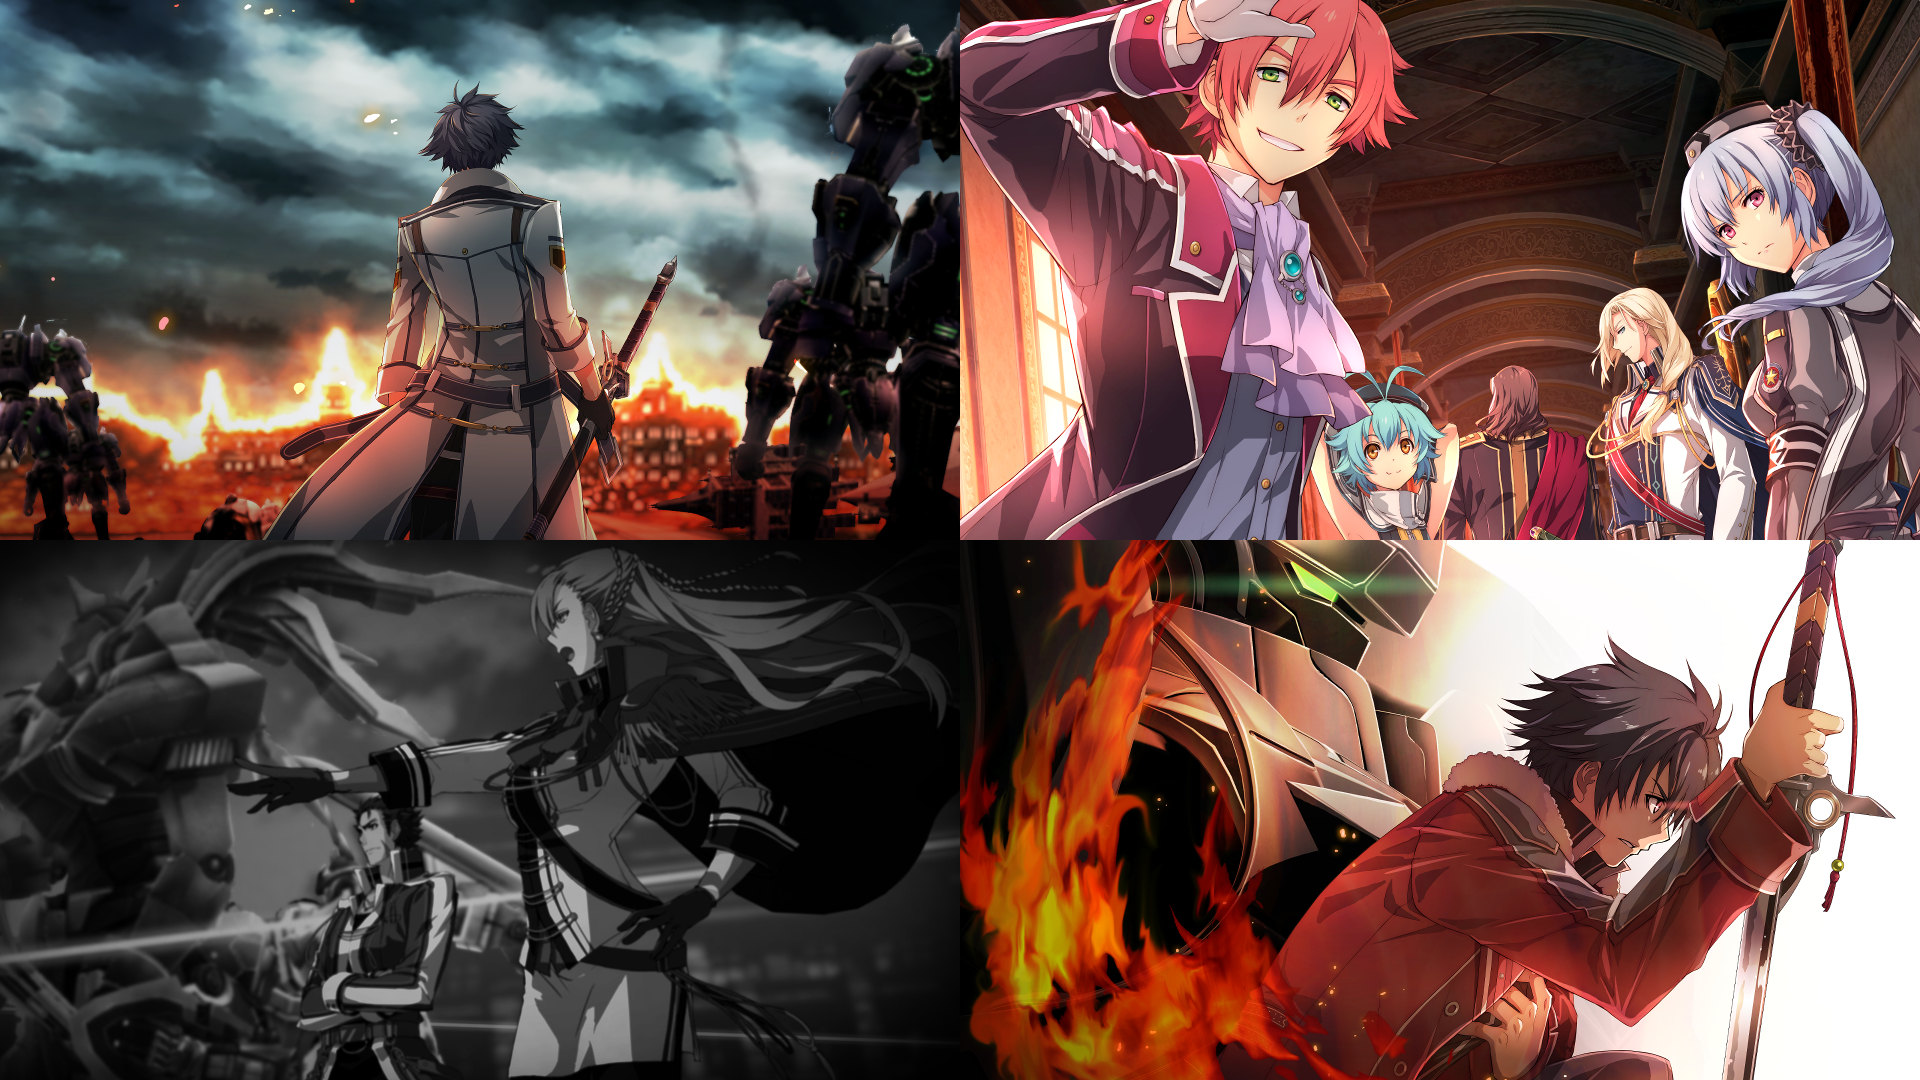 『The Legend of Heroes 閃の軌跡 Northern War』 (C) Nihon Falcom Corporation. All rights reserved.